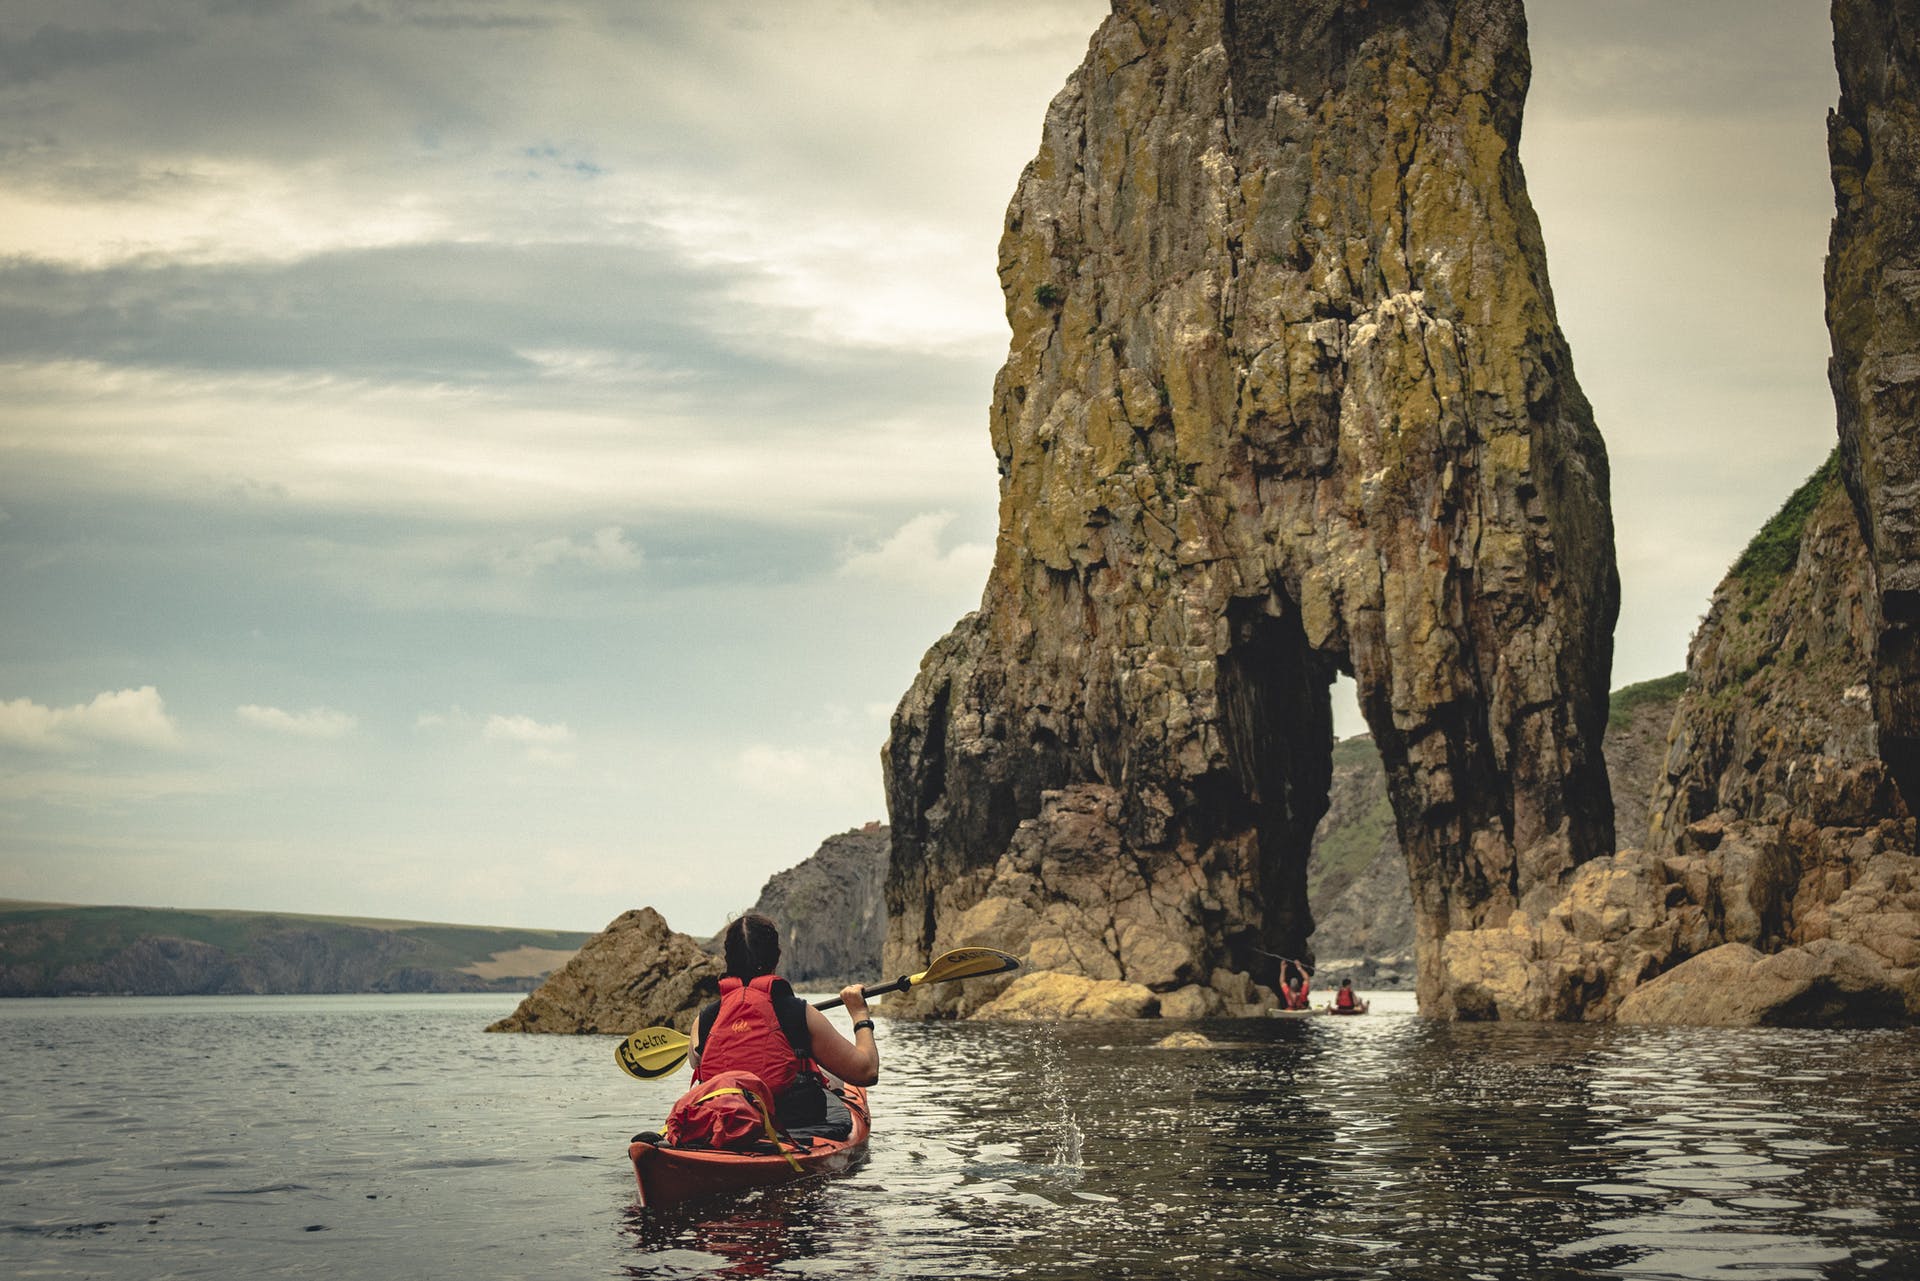 Sea kayaking off the coast of Wales, in Pembrokeshire